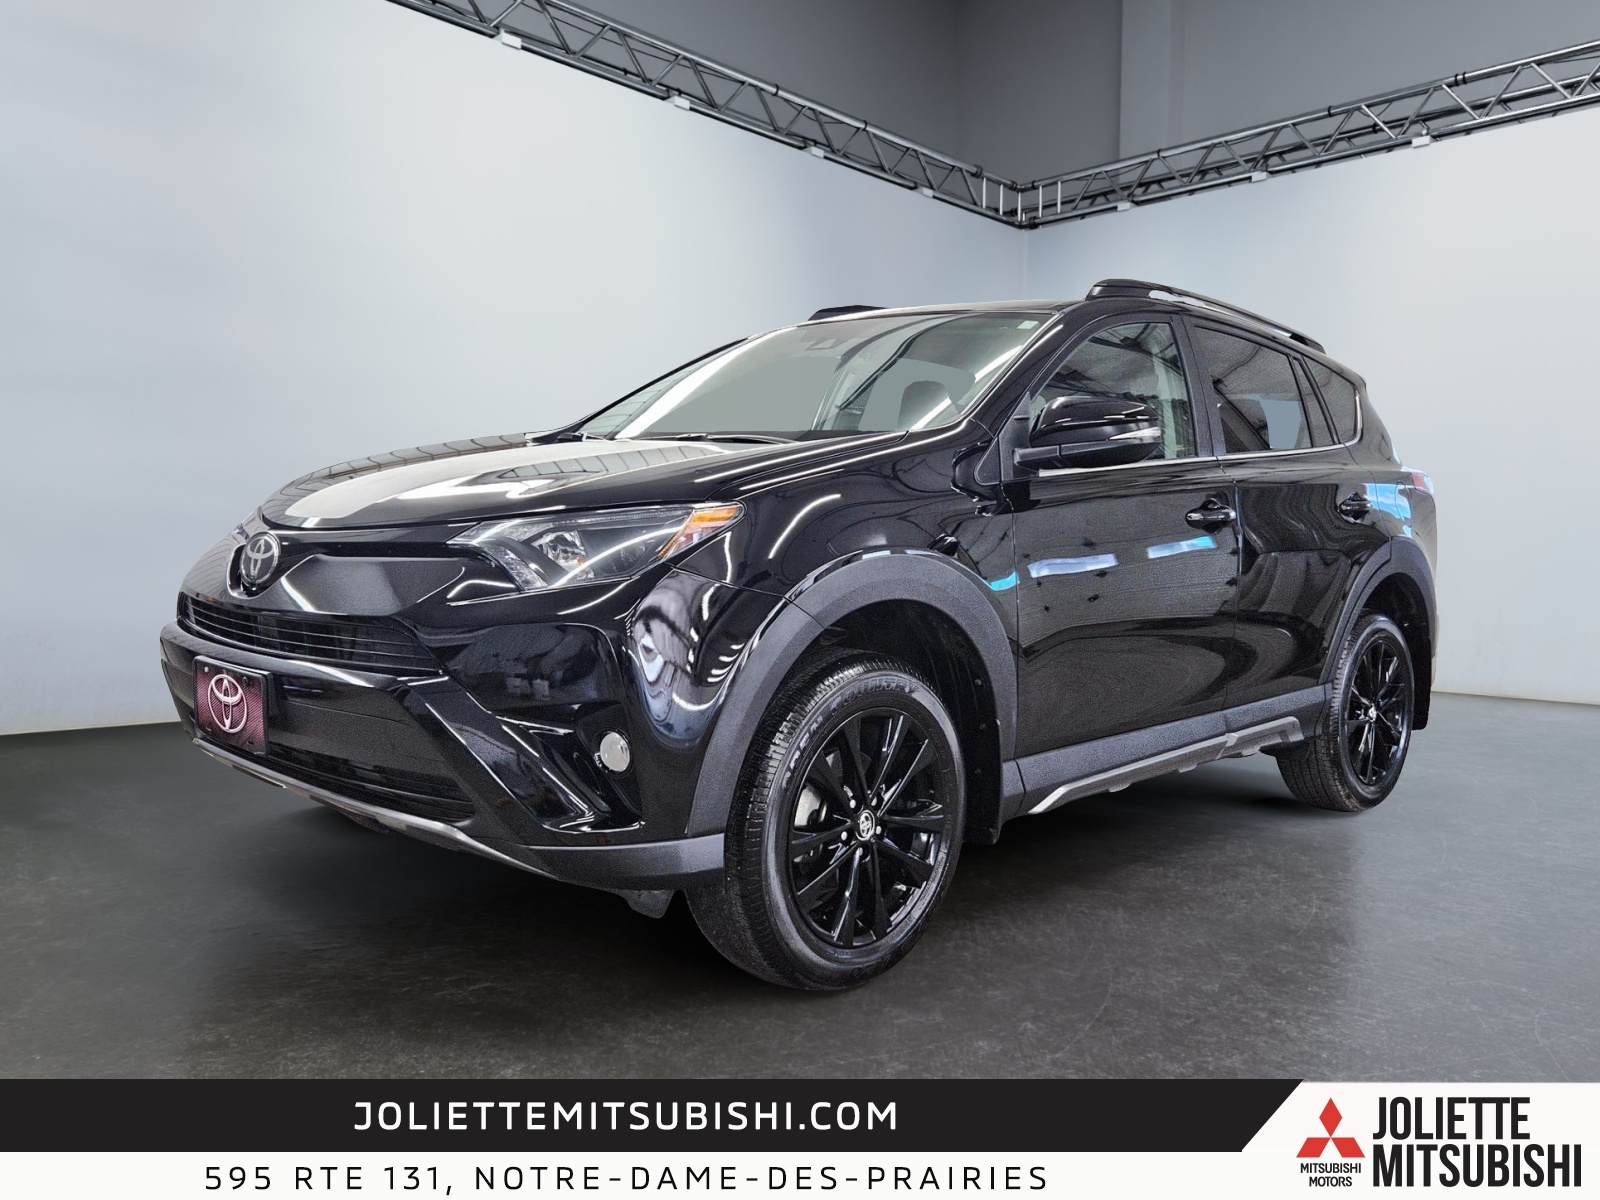 2018 Toyota RAV4 Trail XLE AWD Mags Toit Ouvrant 3500lbs Remorquage